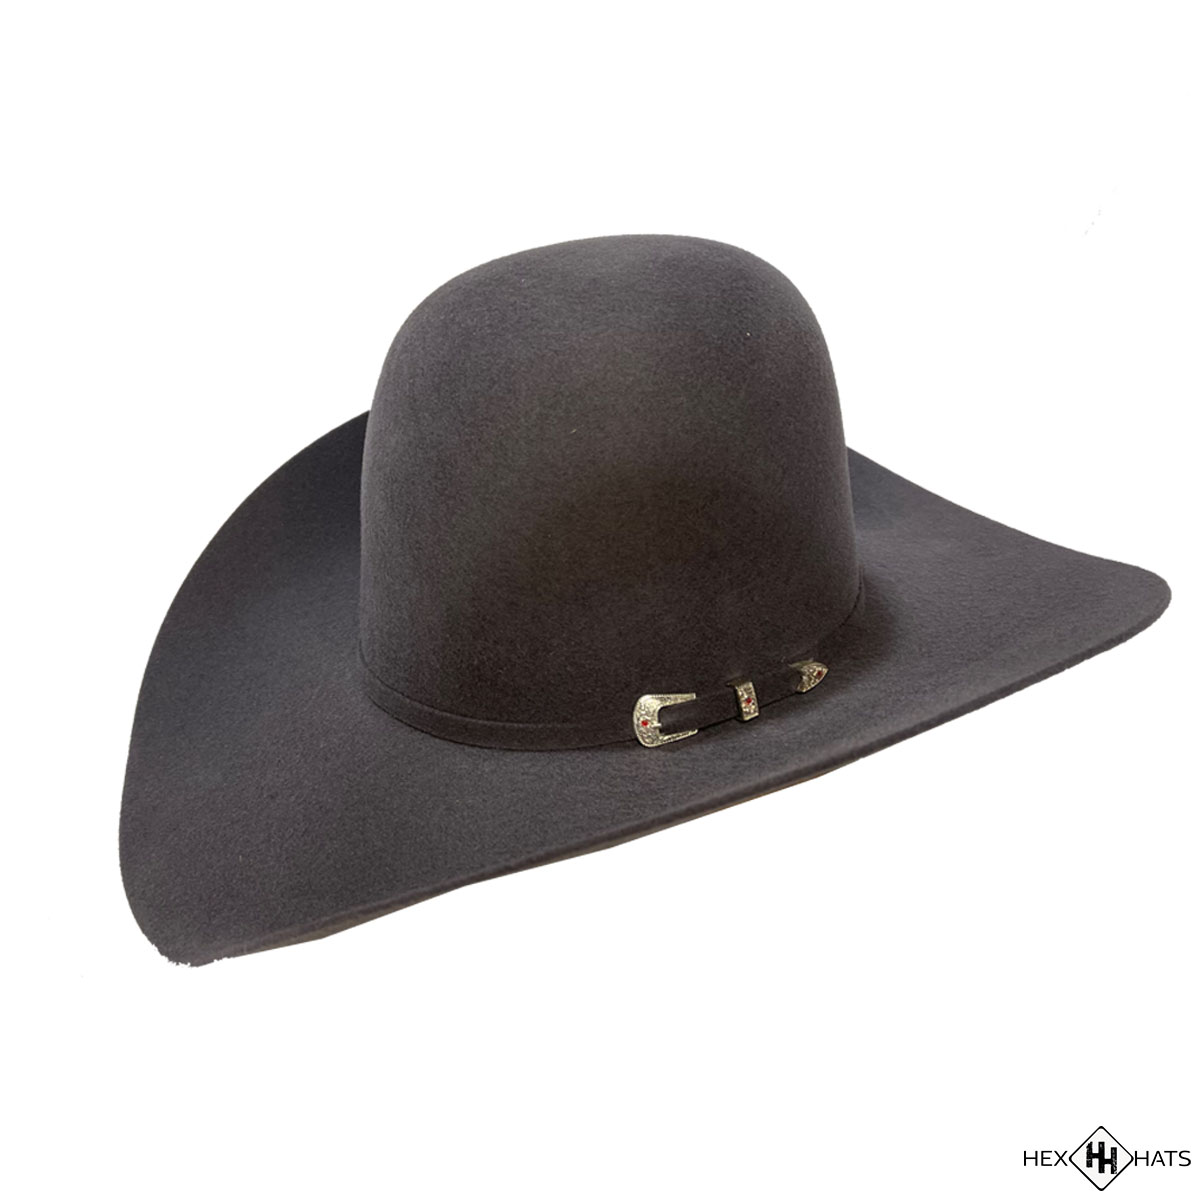 Hex Hats 5x Grey | Western Wear, Boots and More | Hex Hats Co